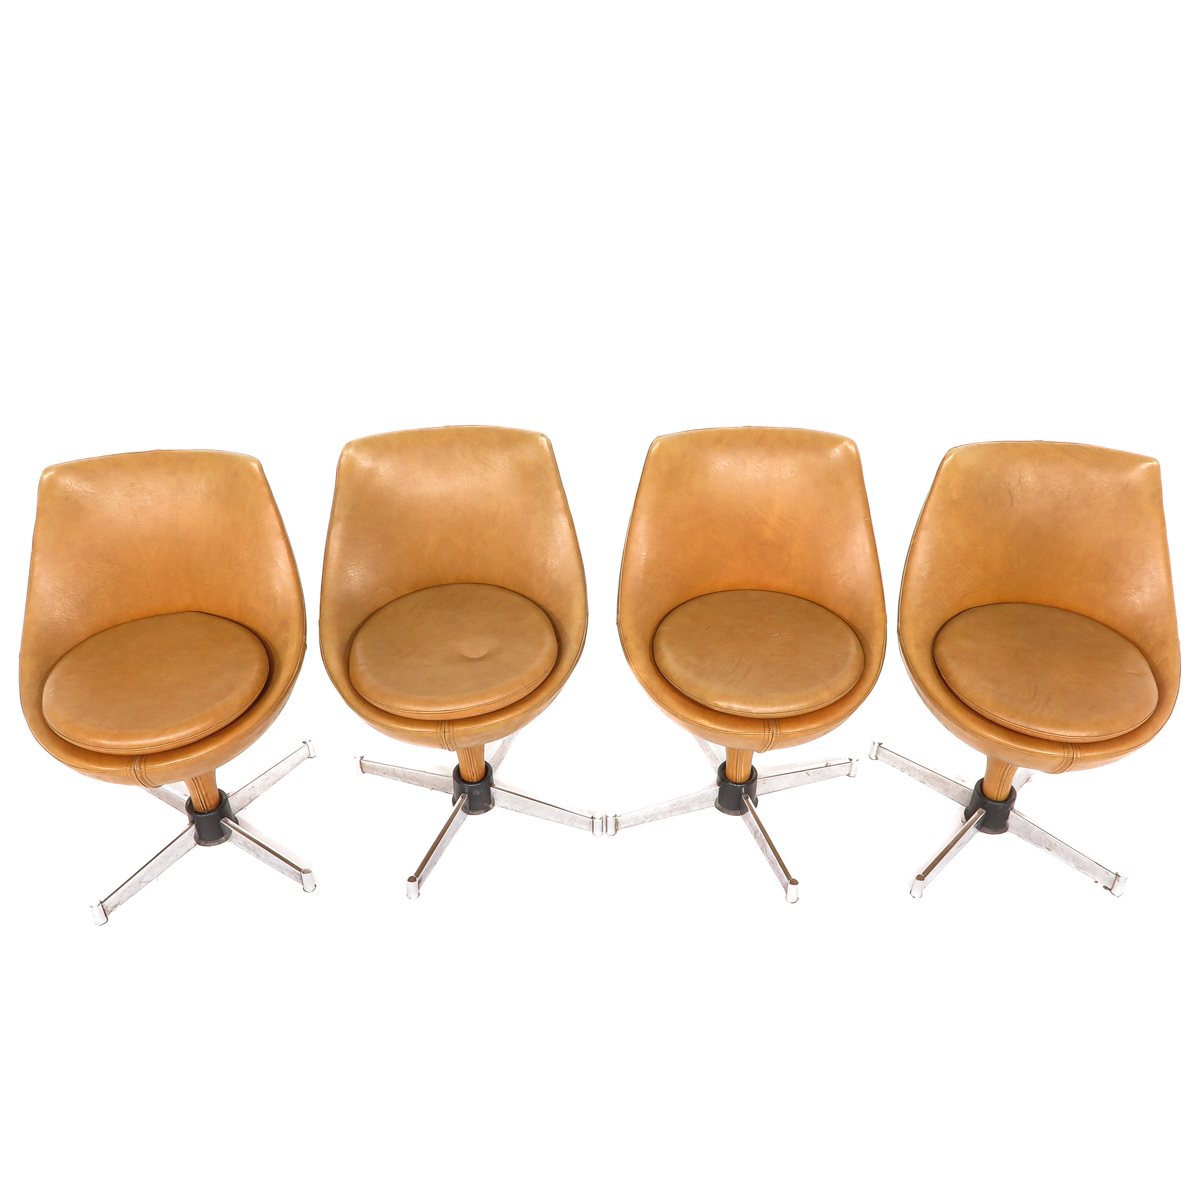 A Set of 4 Pierre Guariche Designer Chairs - Image 5 of 10